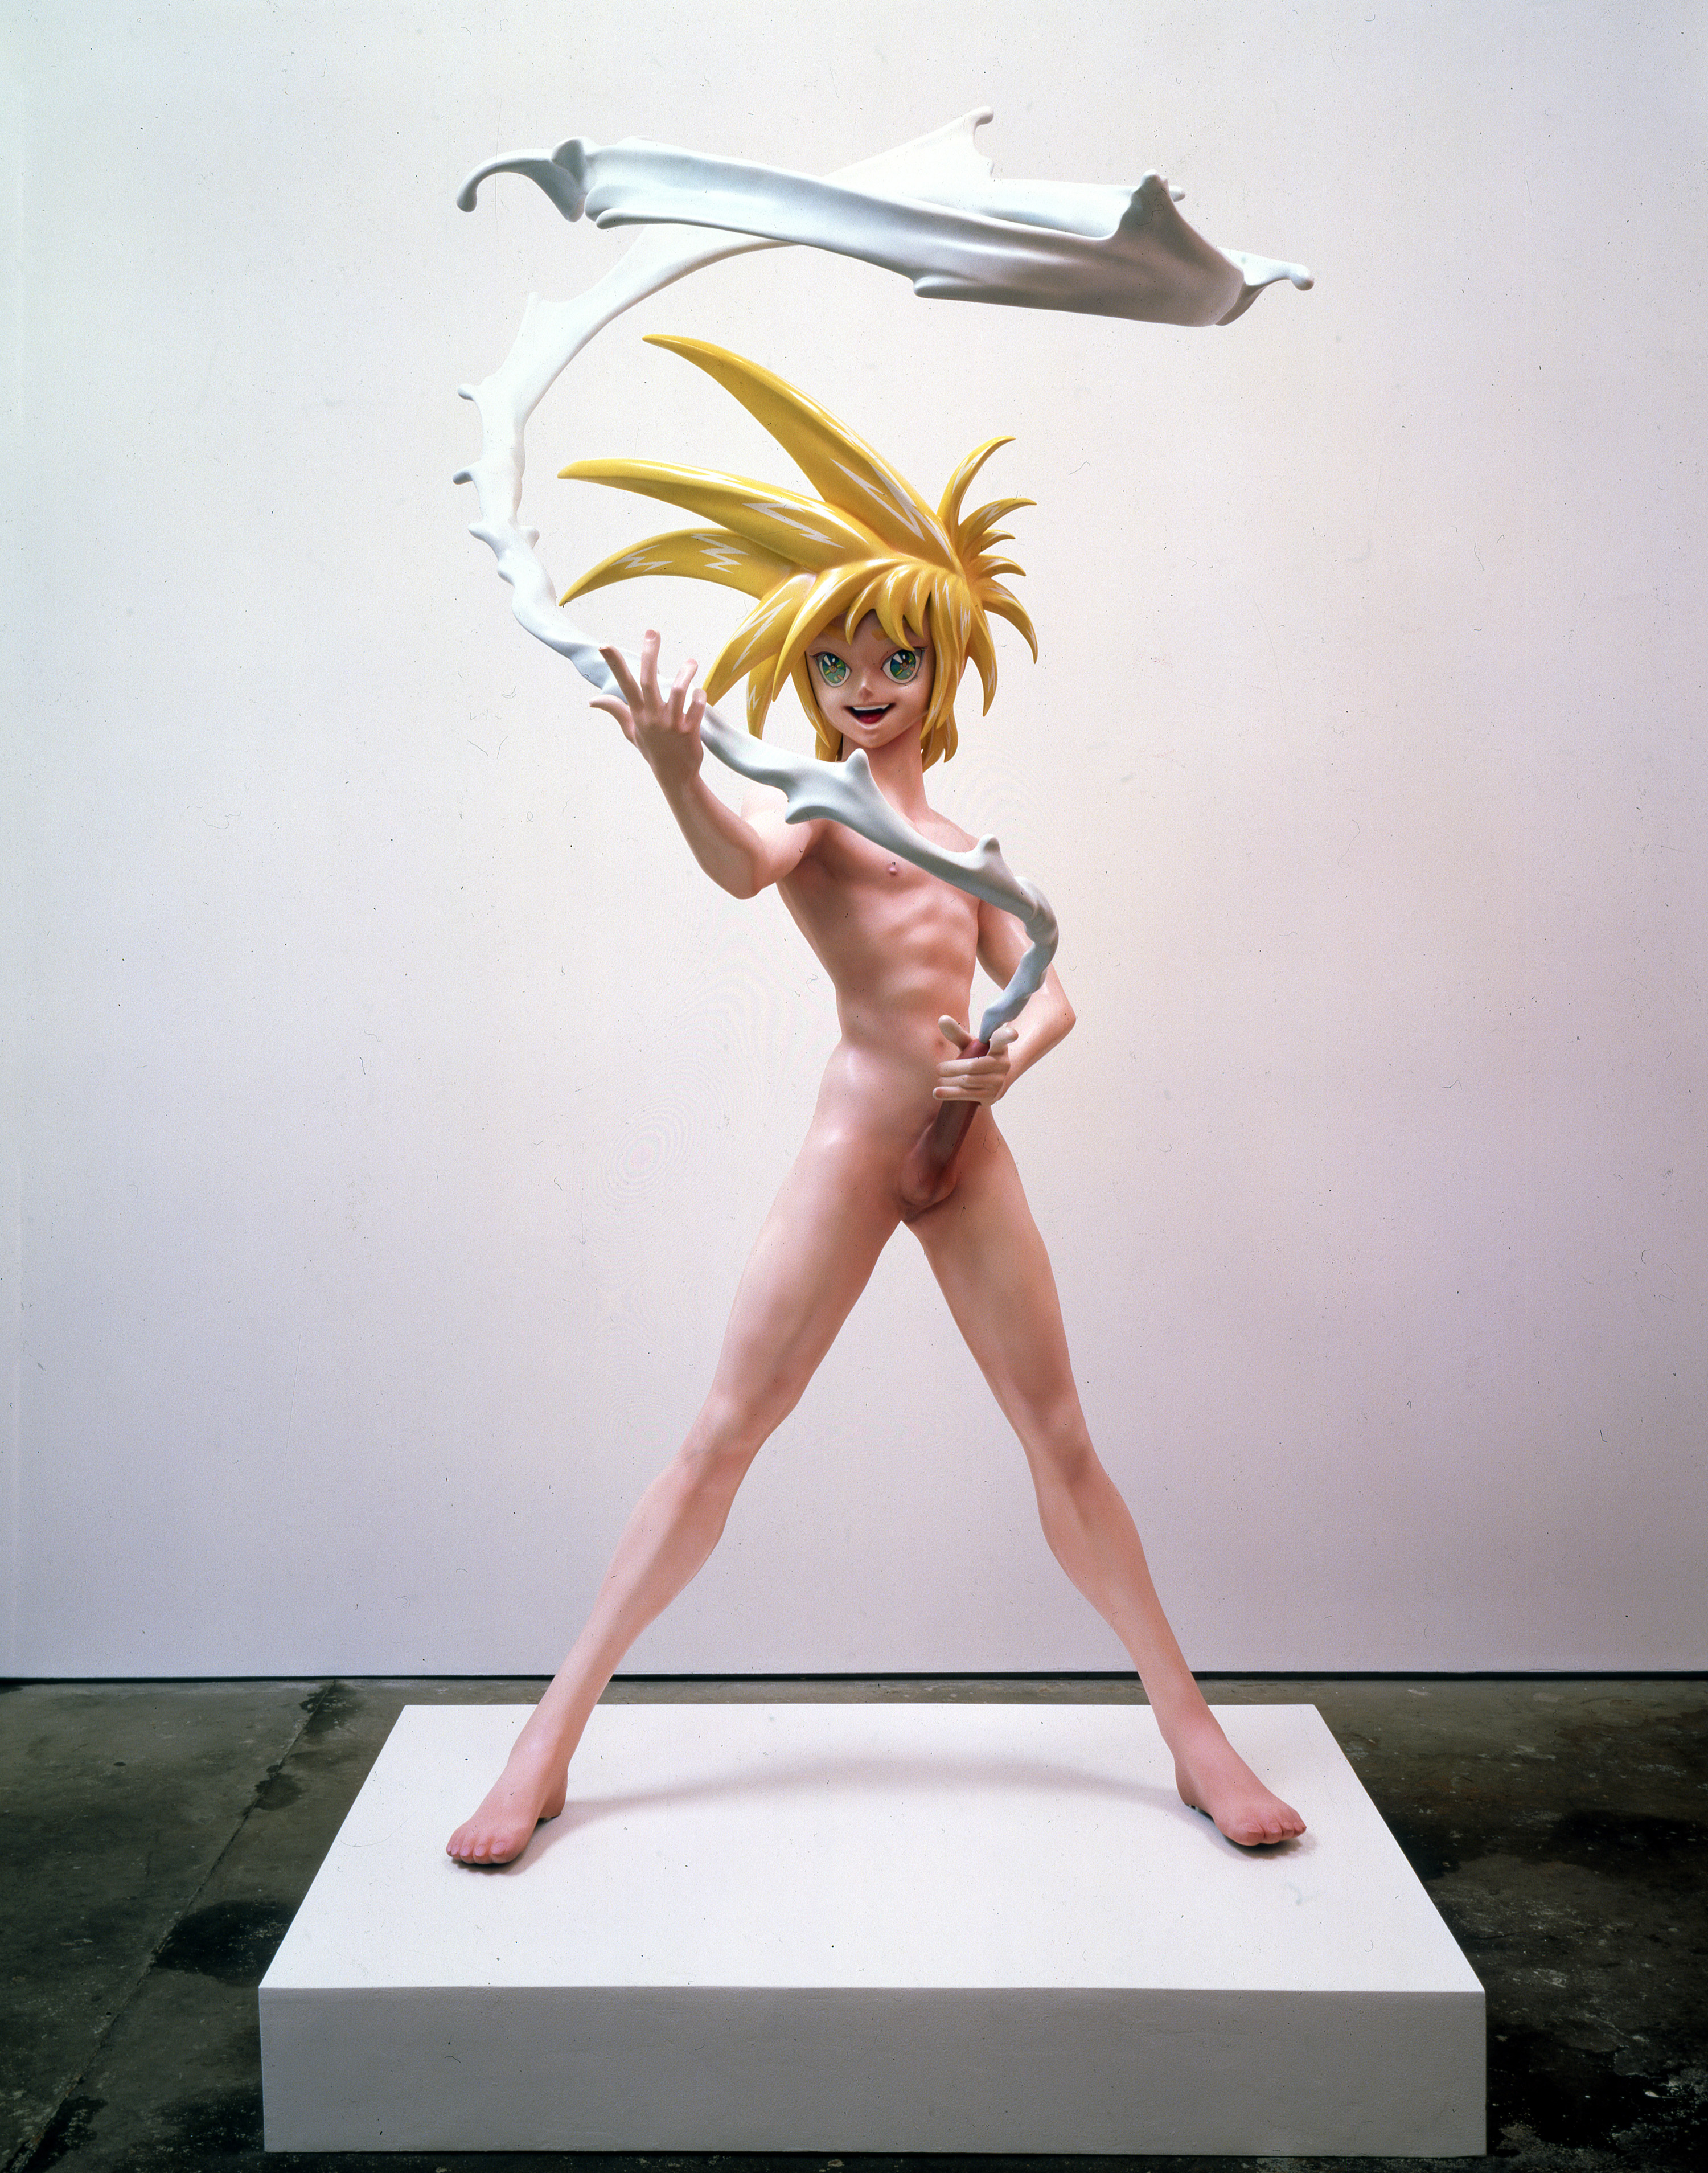 statue of a naked man with anime features in a wide stance, grasping his ejaculating penis